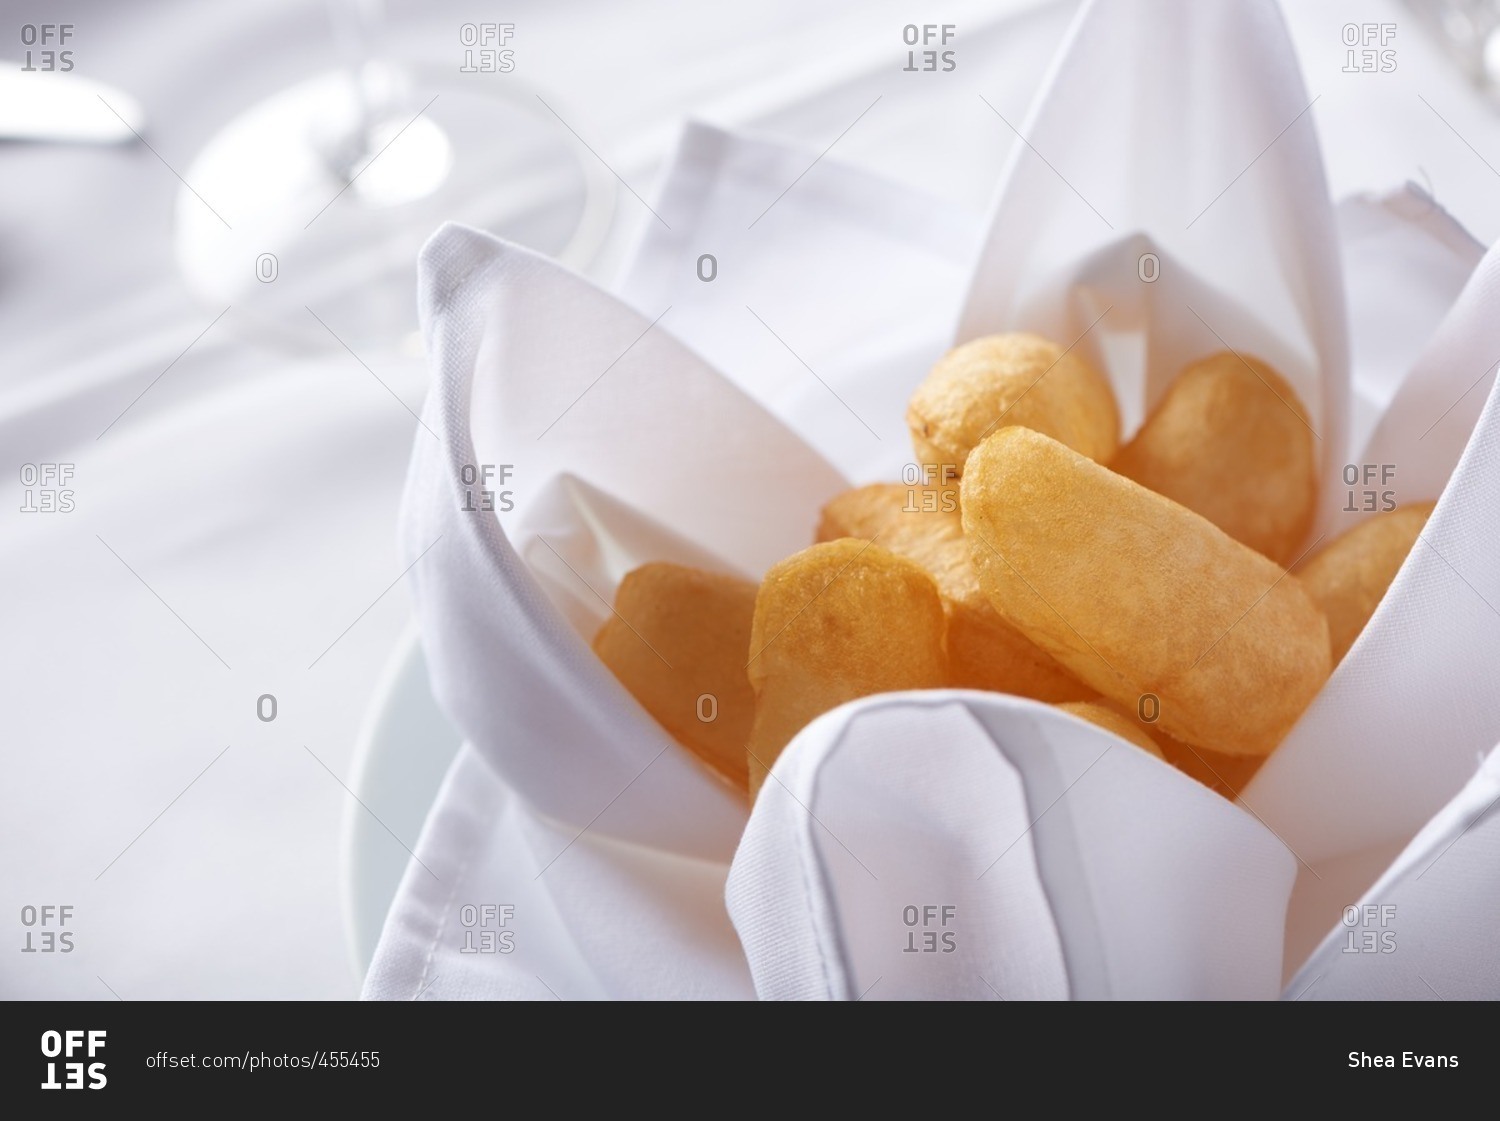 Traditional French fries, Pommes De Terre Souffles, potatoes that have been puffed, hollow on the inside and served hot with sea salt.